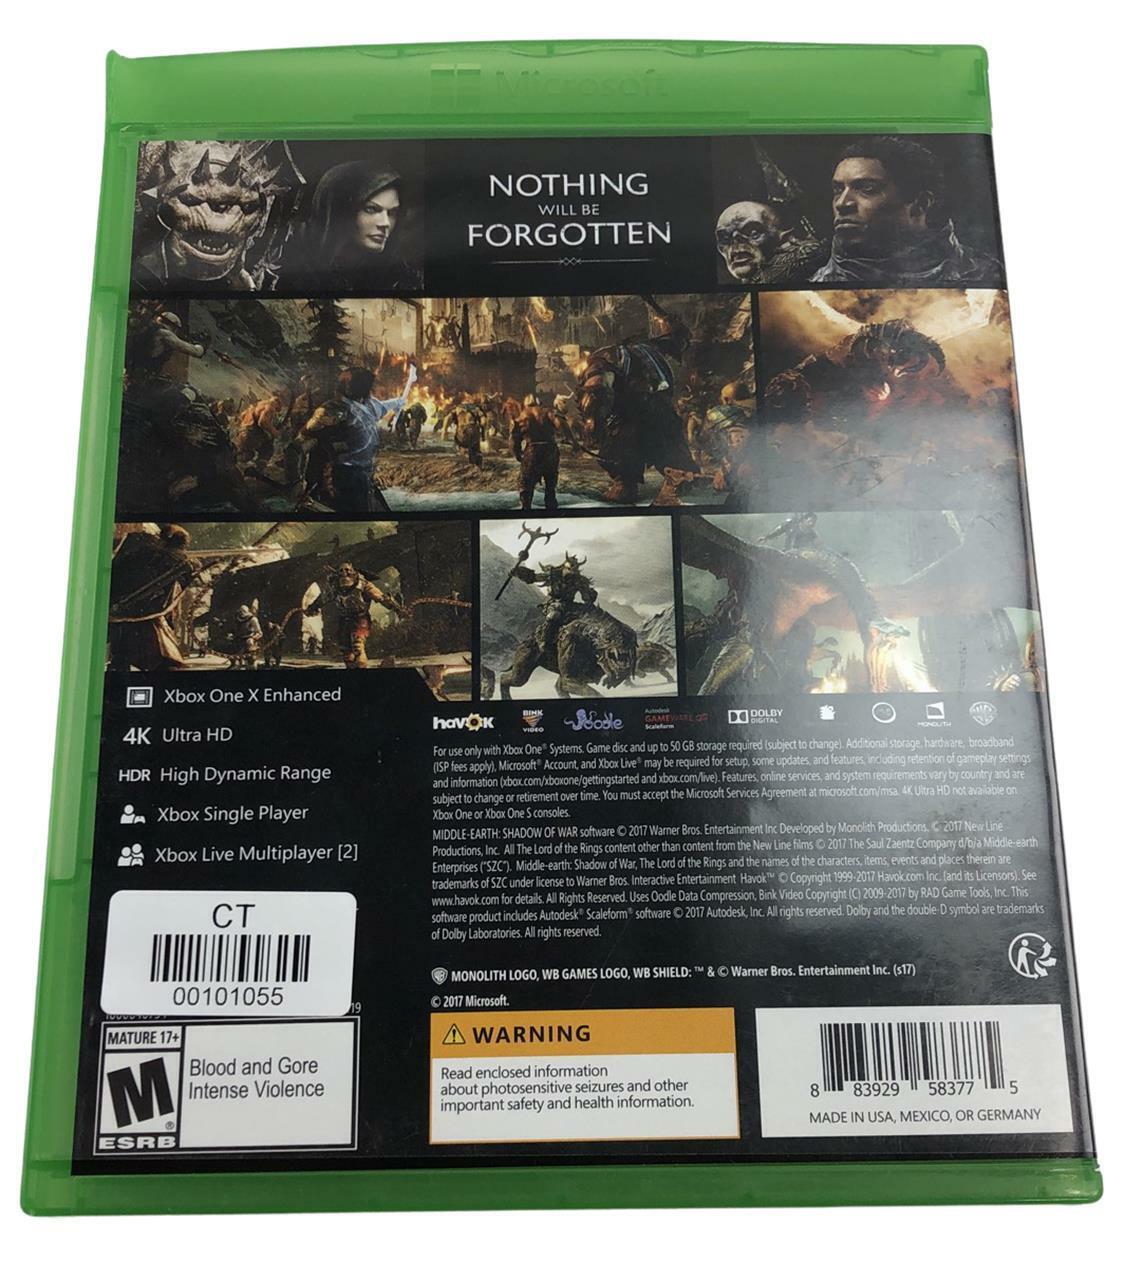 Microsoft XBox One - Middle Earth: Shadow of War - Action / Adventure Video Game